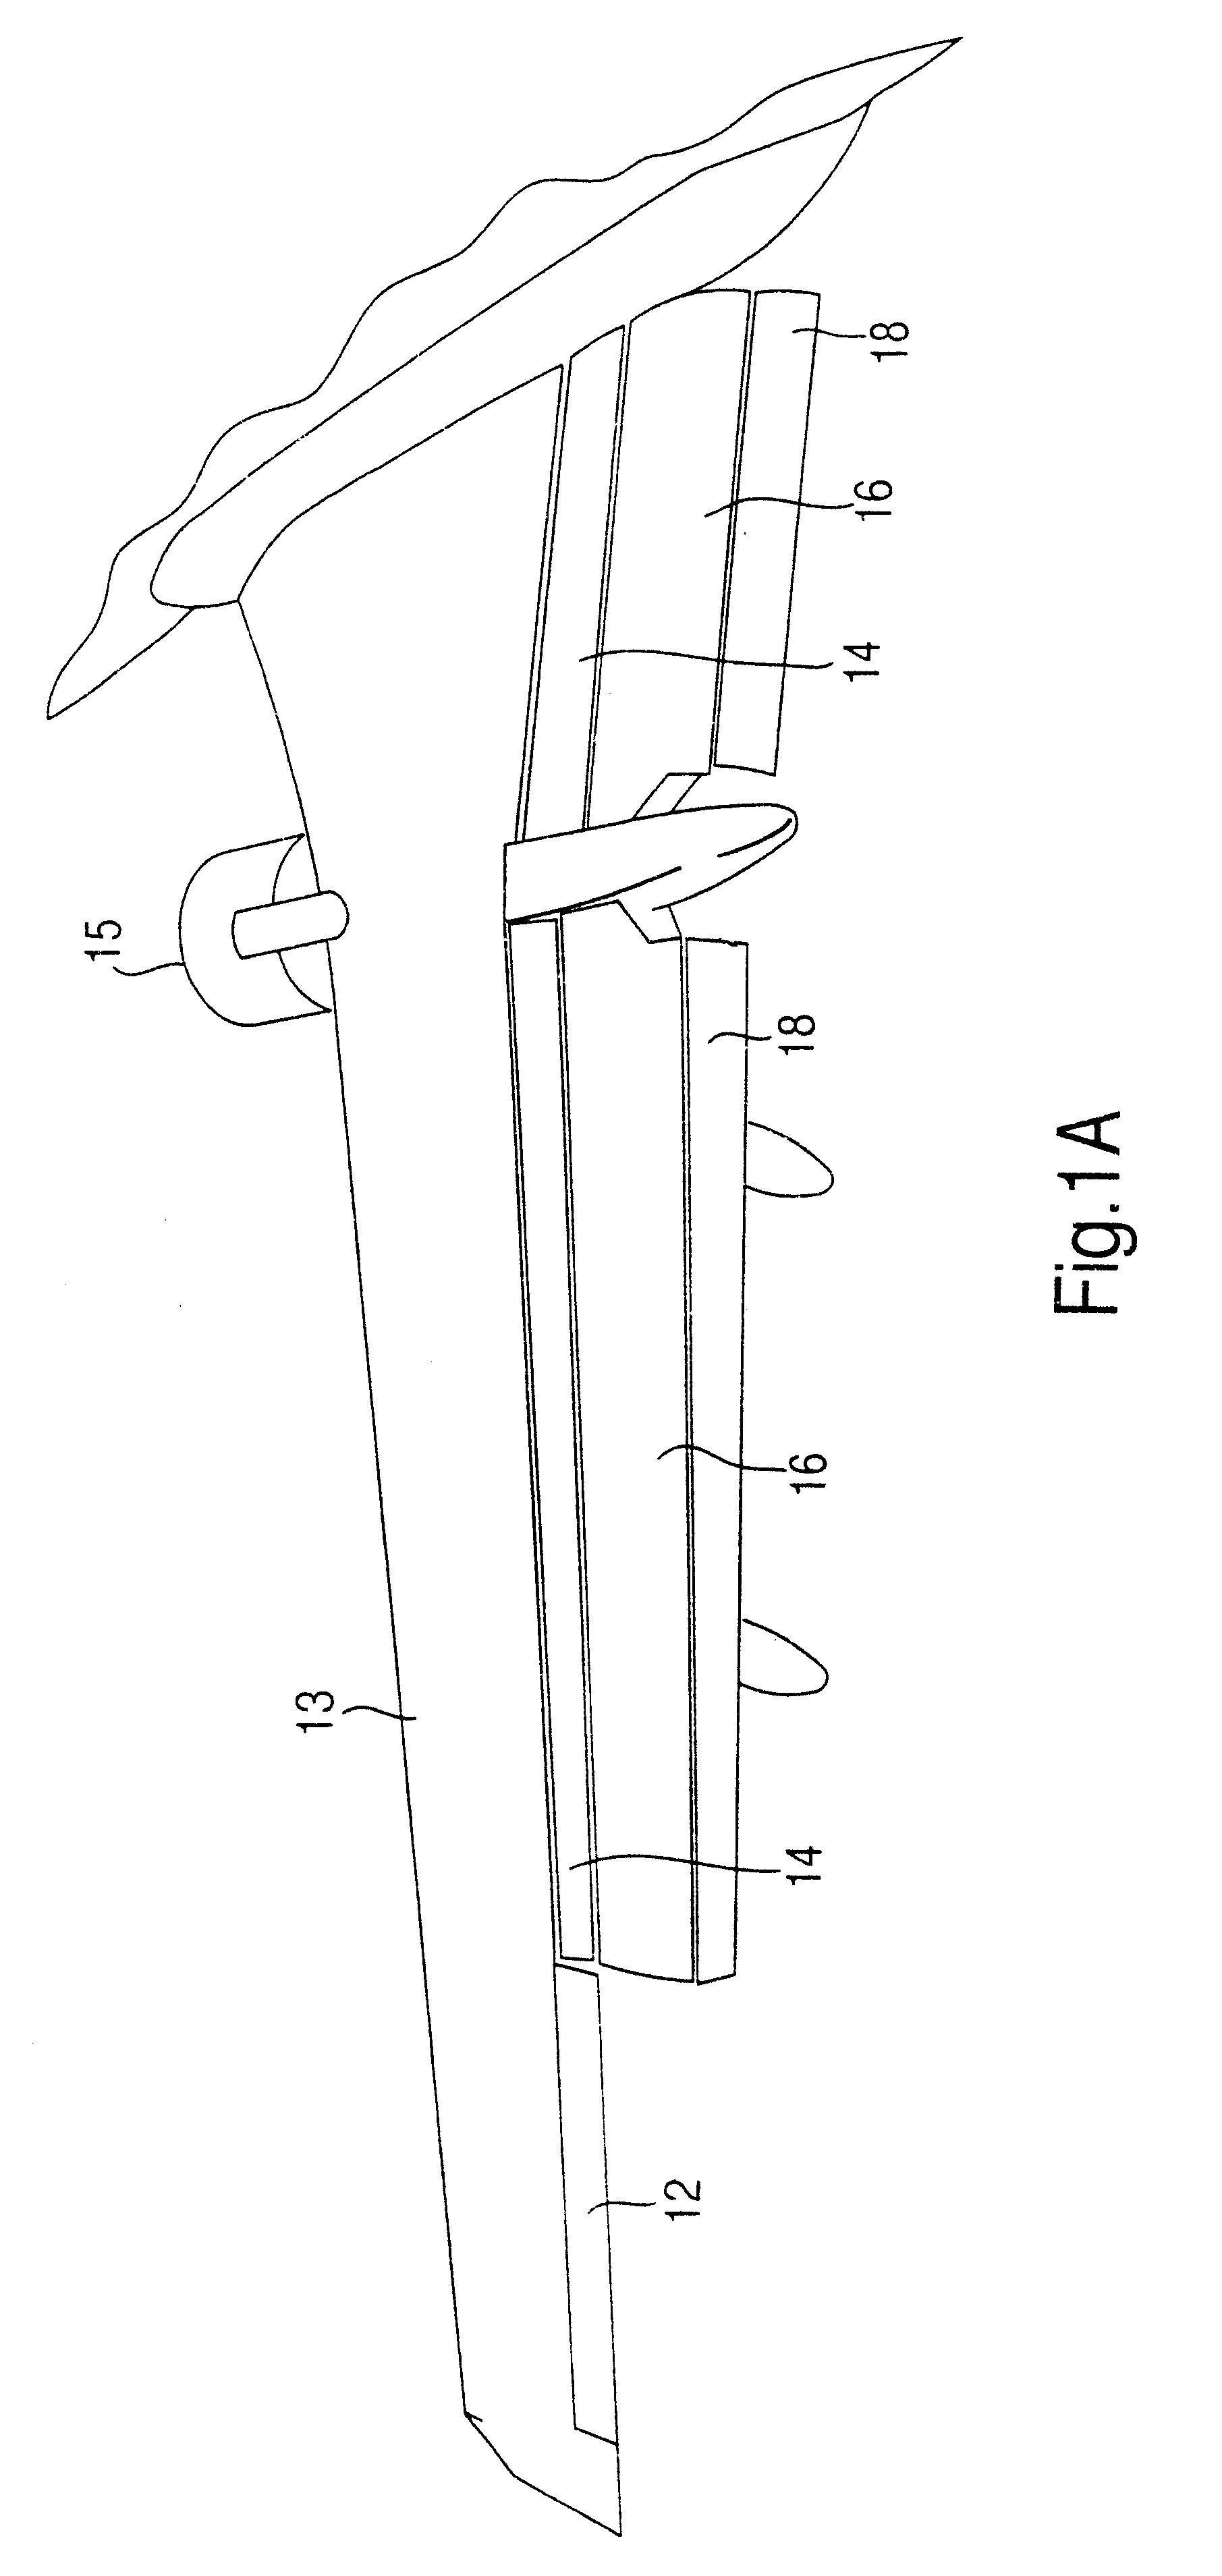 Method for reducing fuel consumption in aircraft